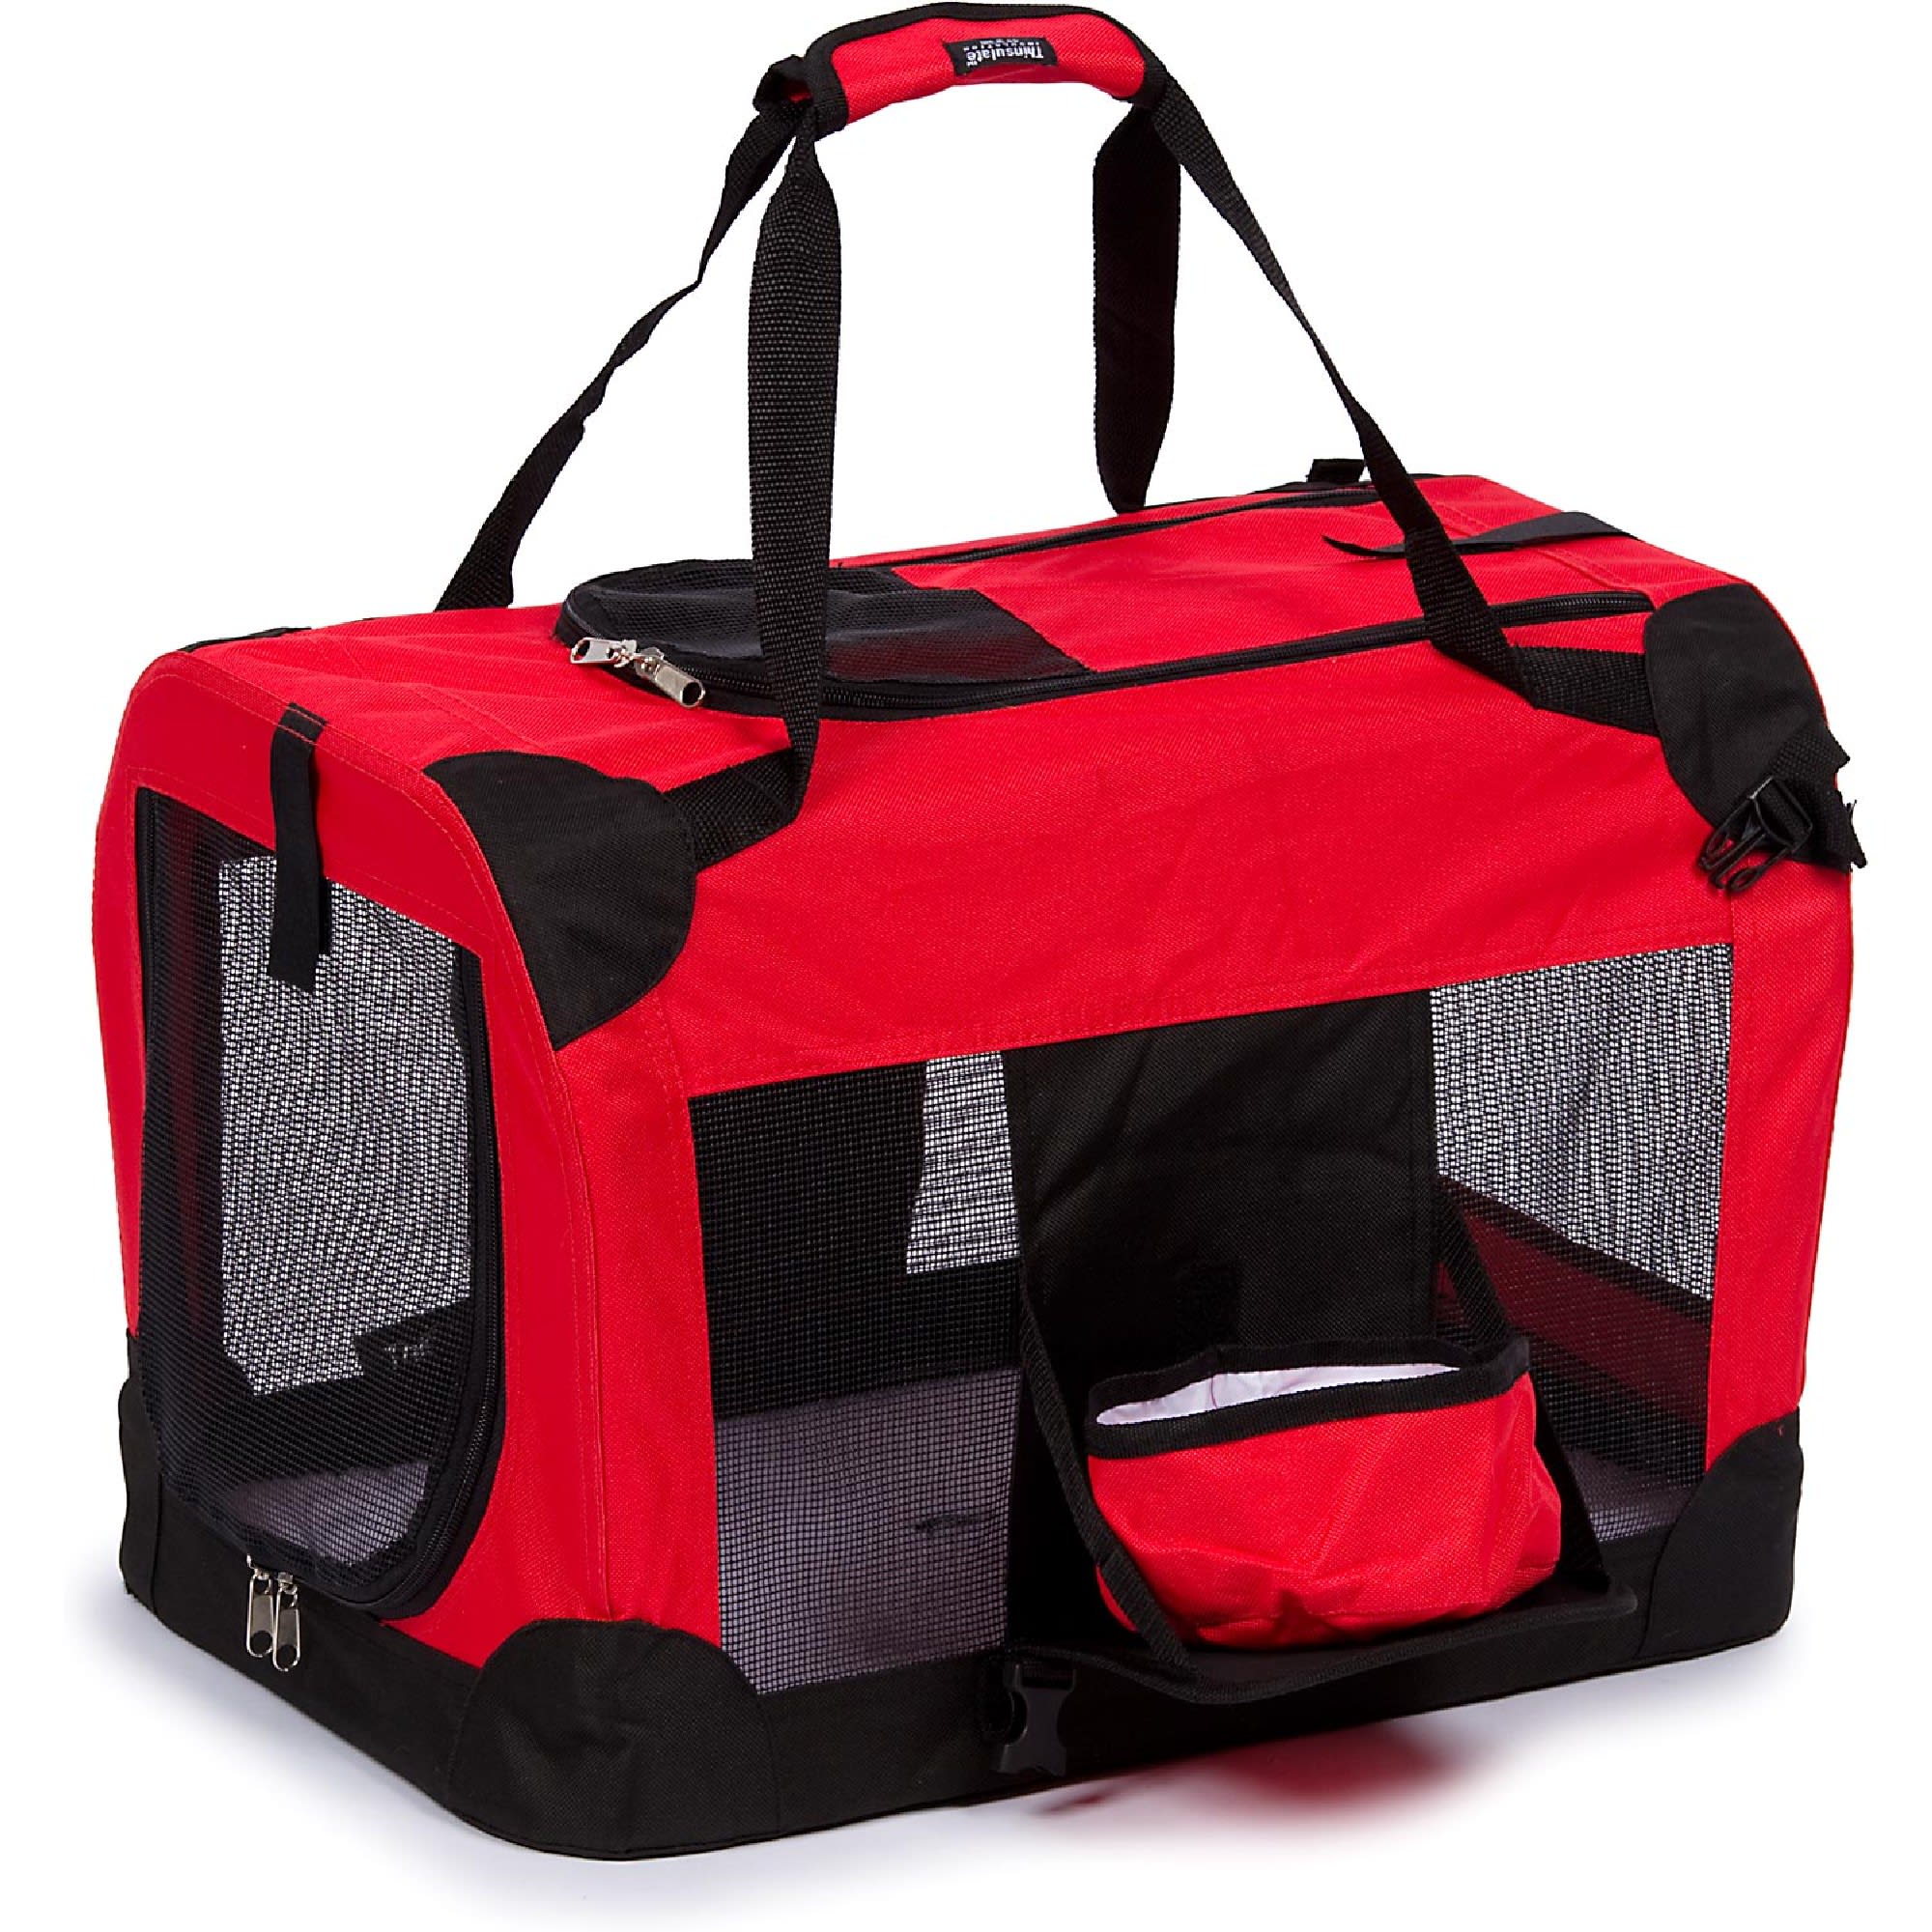 Premium 600D Fabric Indoor/Outdoor Comes with Comfort Pad Pet Gear 3 Door Portable Soft Crate Folds Compact for Travel in Seconds No Tools Required Steel Frame Storage Bag 